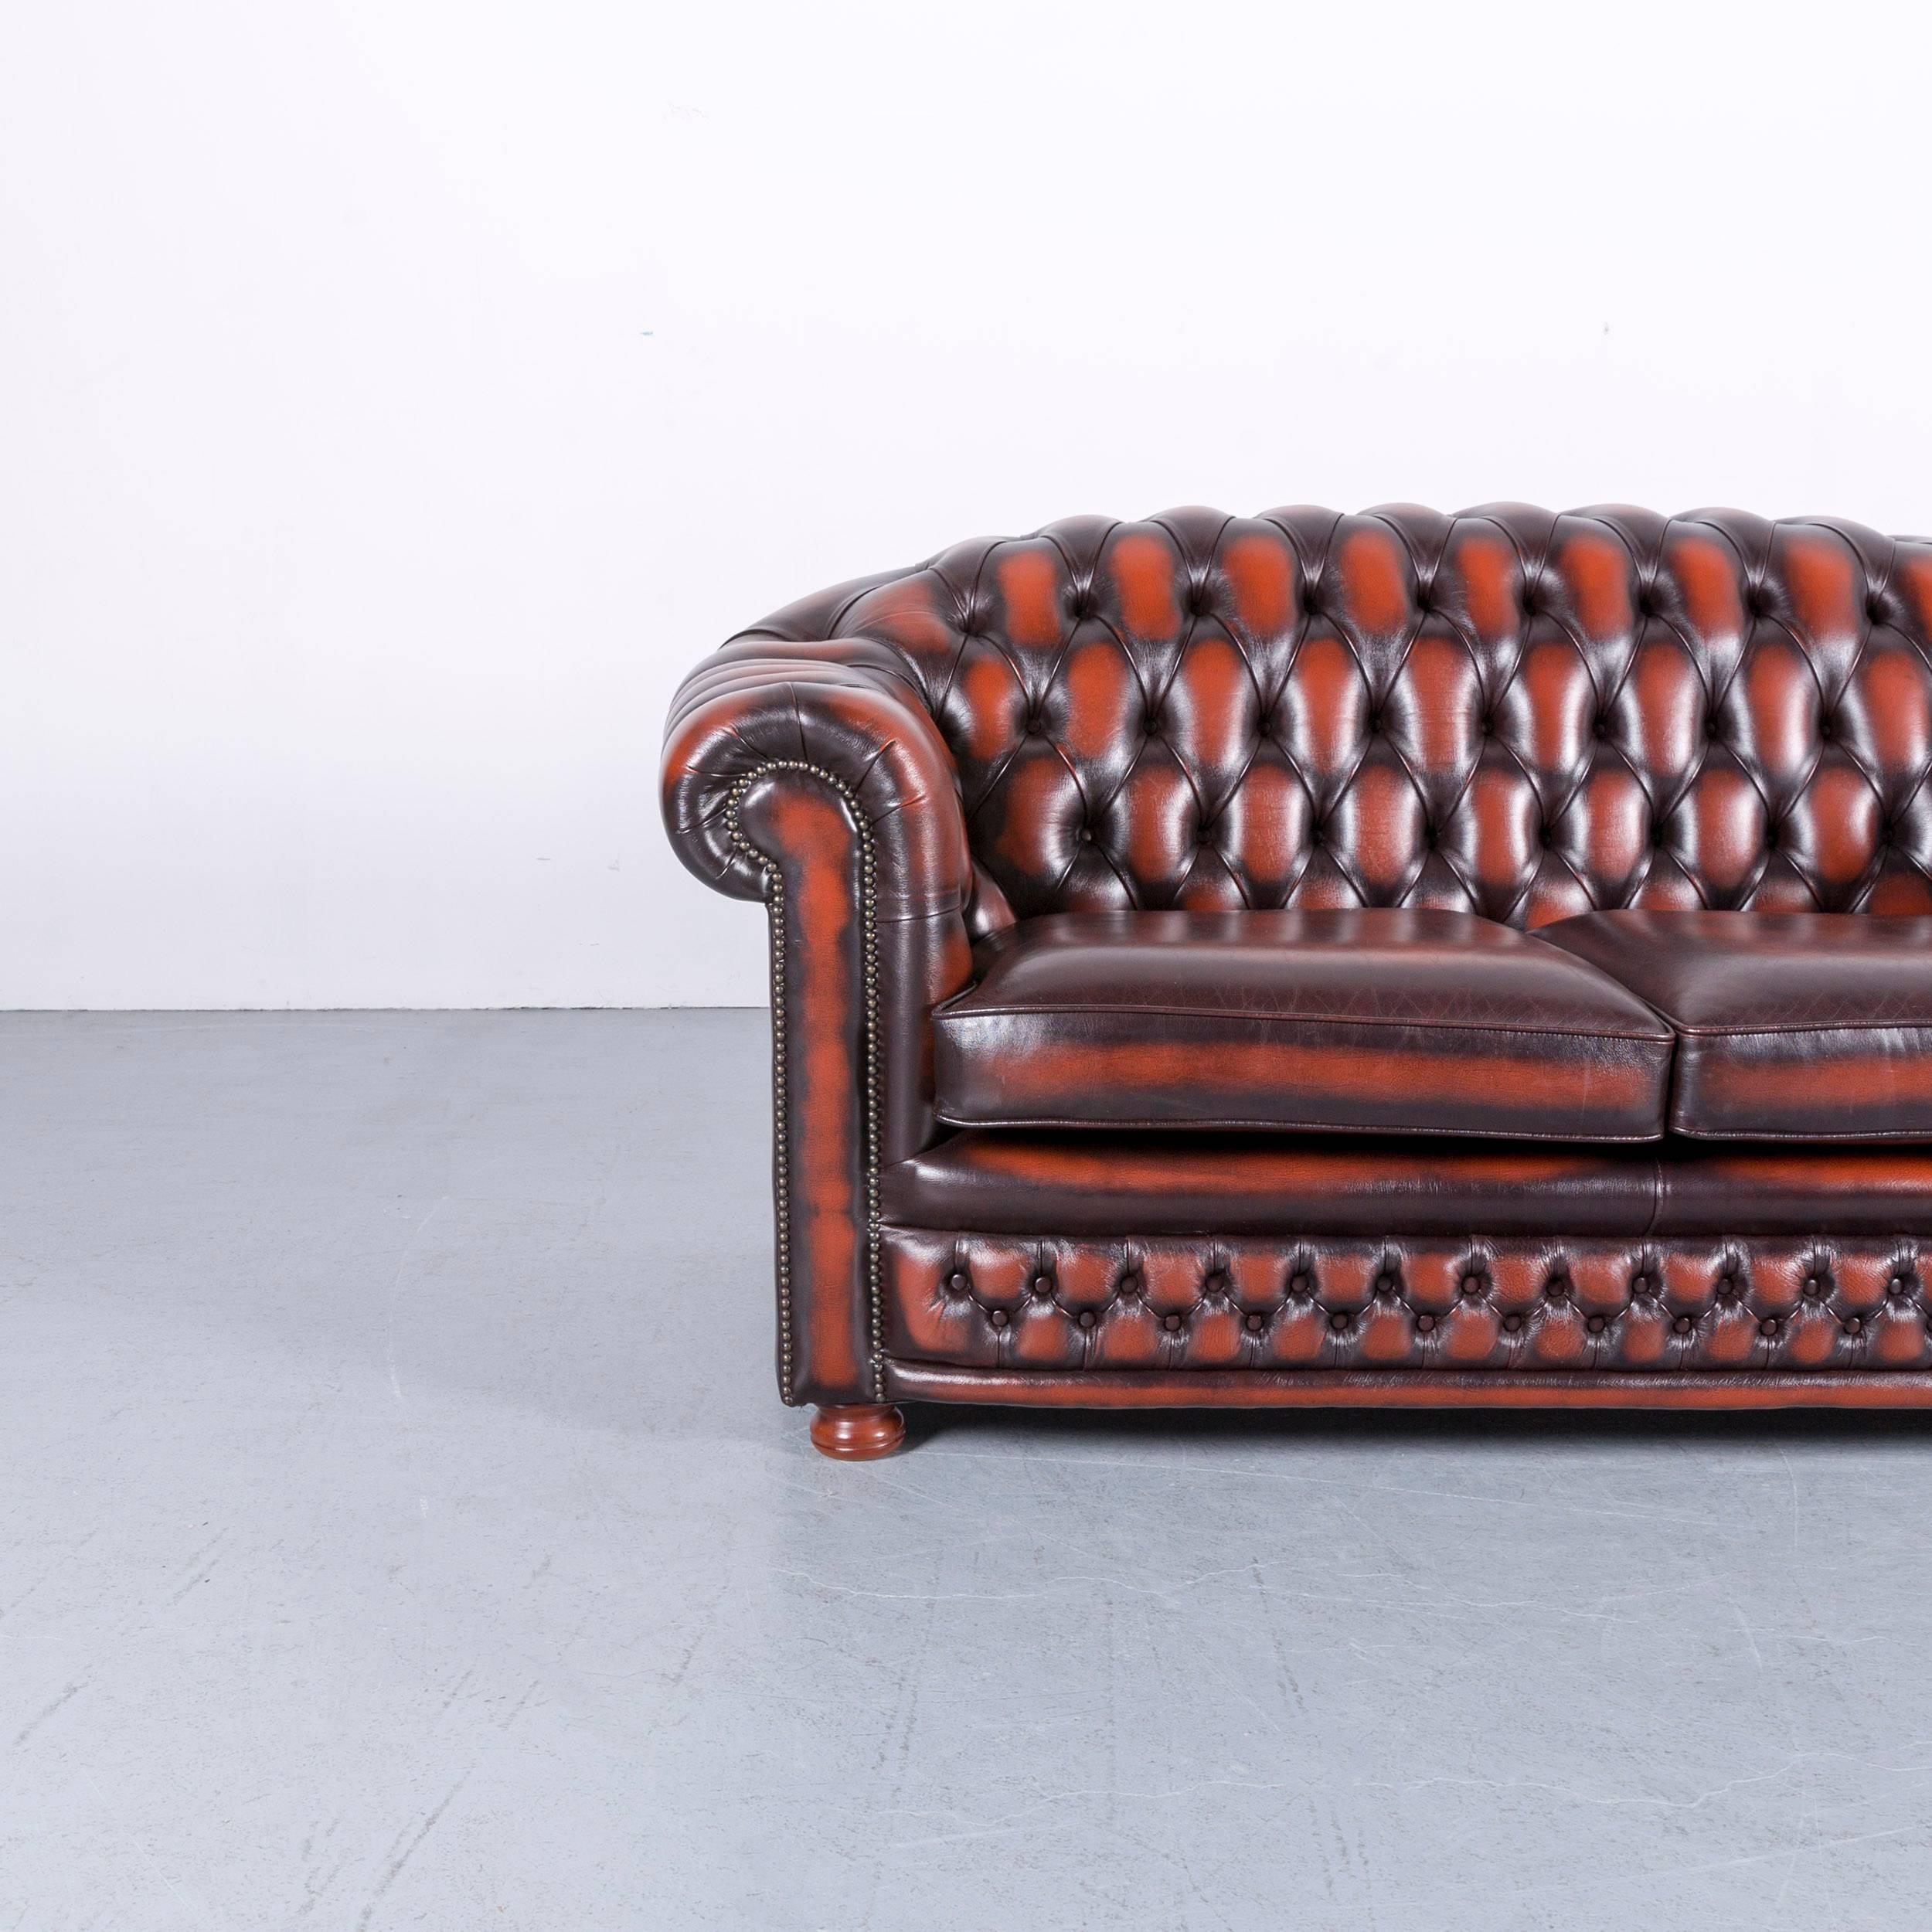 We bring to you an Chesterfield leather sofa brown orange two-seat.


























         